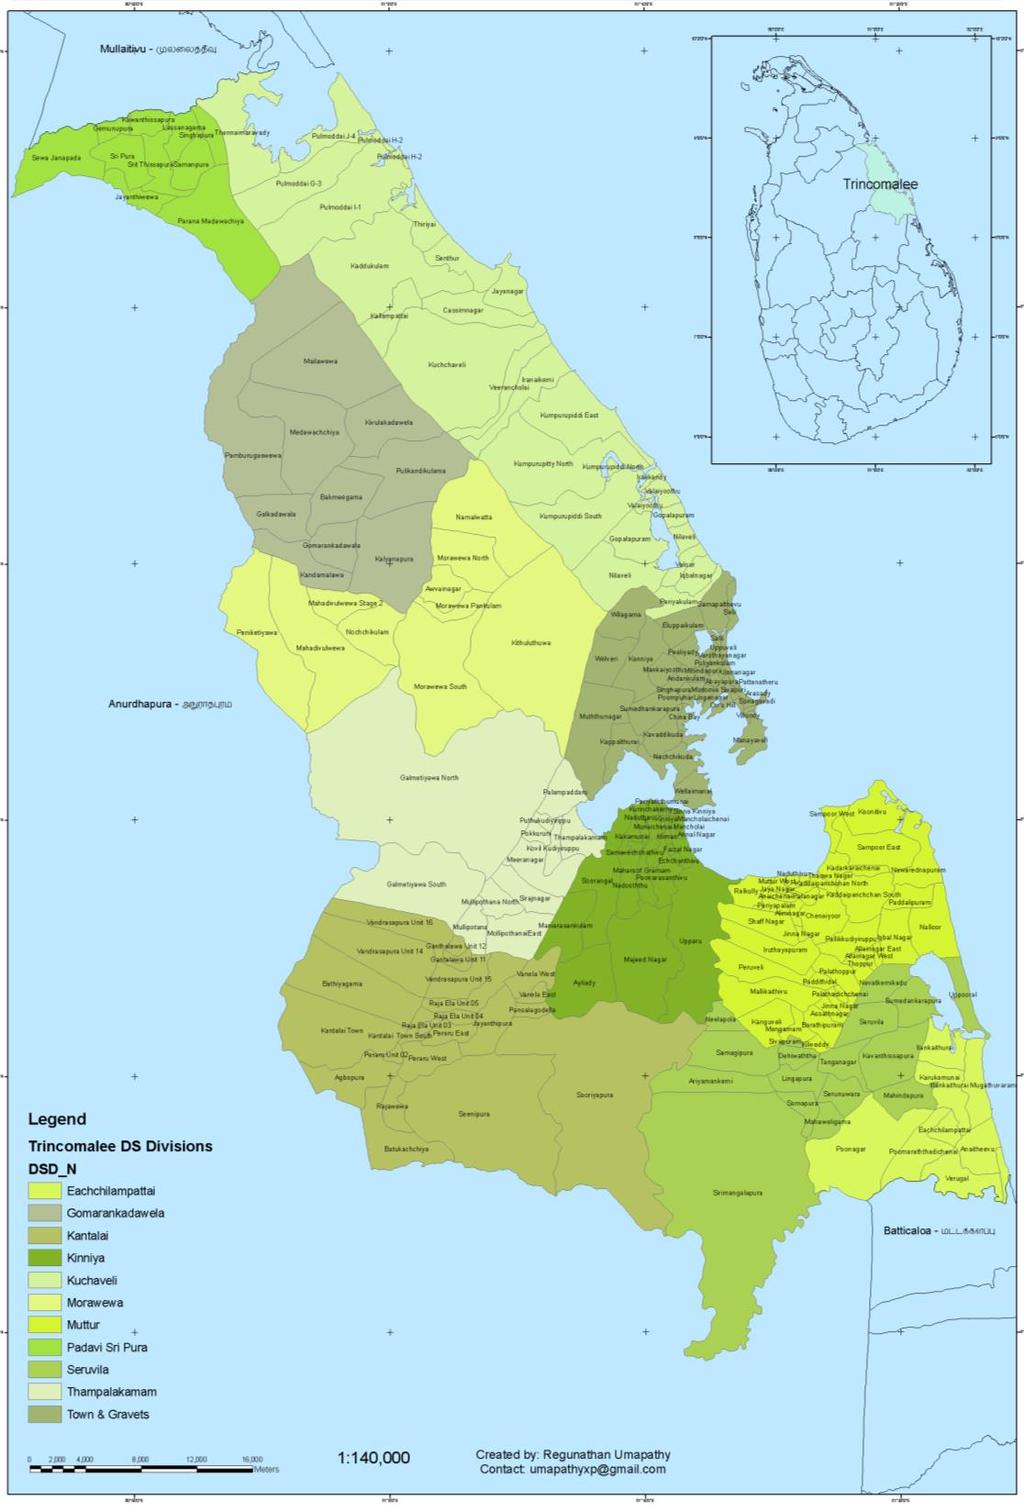 District map of Trincomalee Source:https://upload.wikimedia.